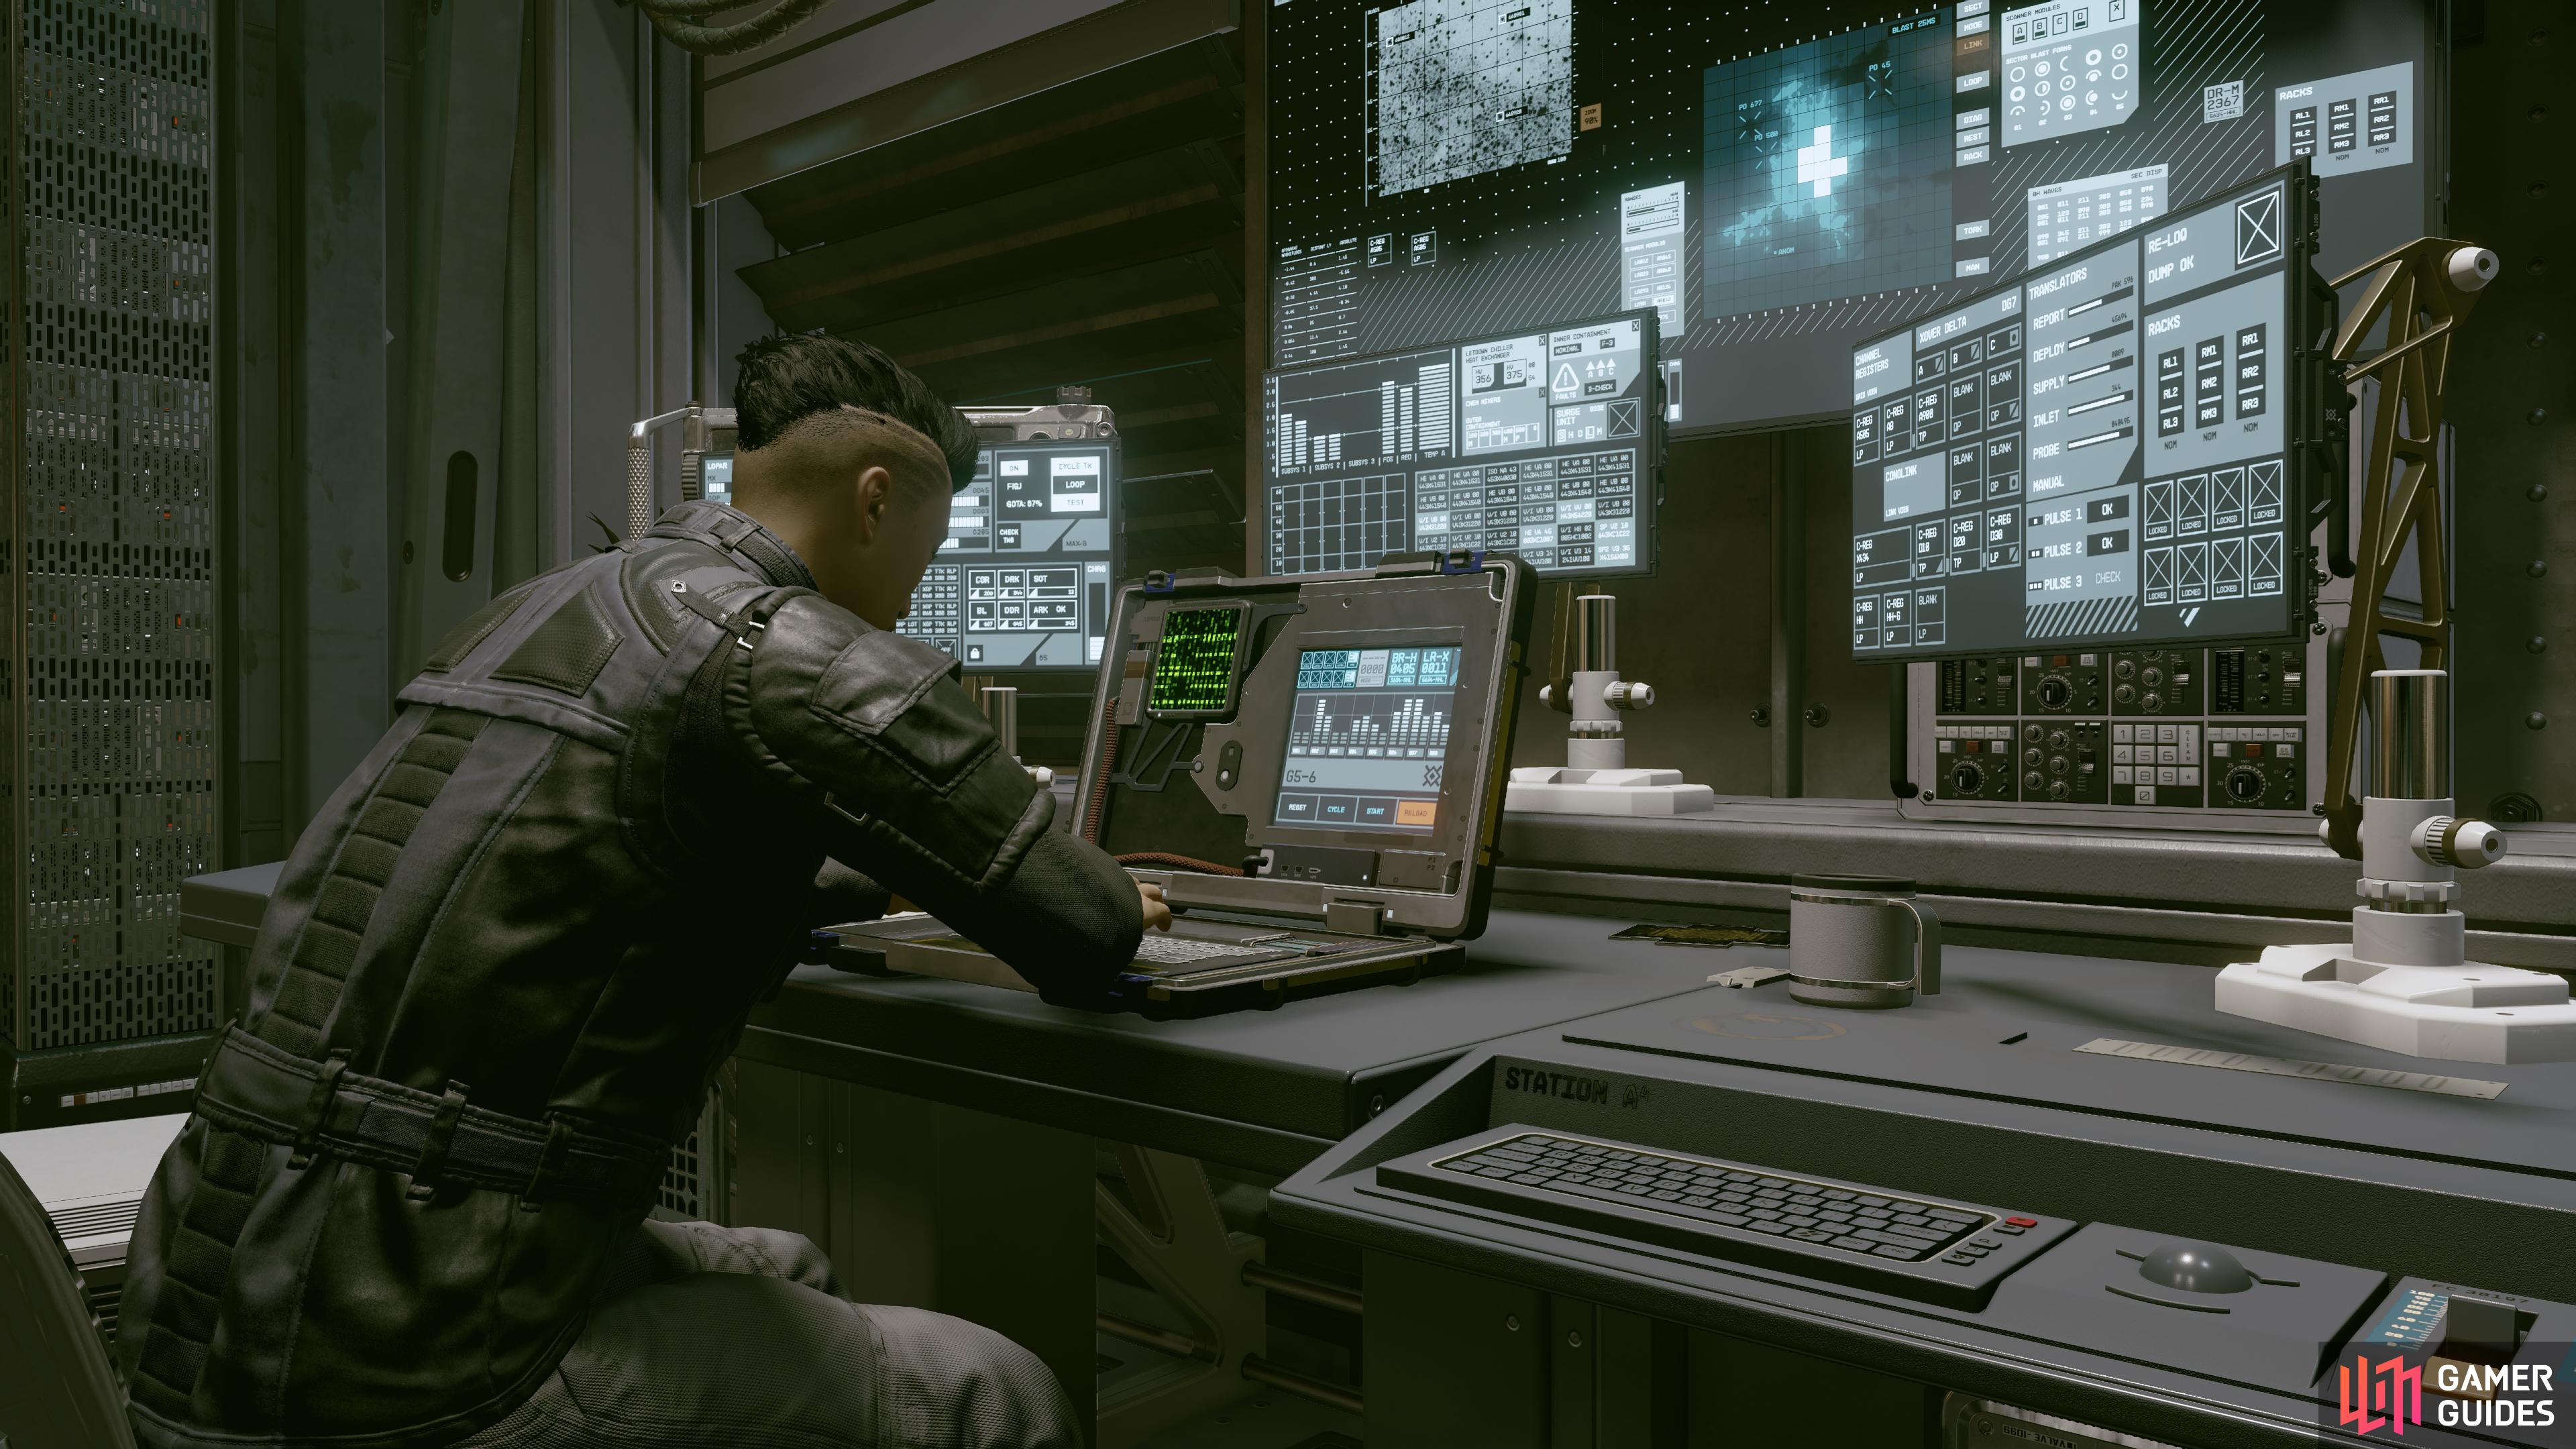 Nyx is trying looking to all the suspicious activity at Ryujin Industries. 